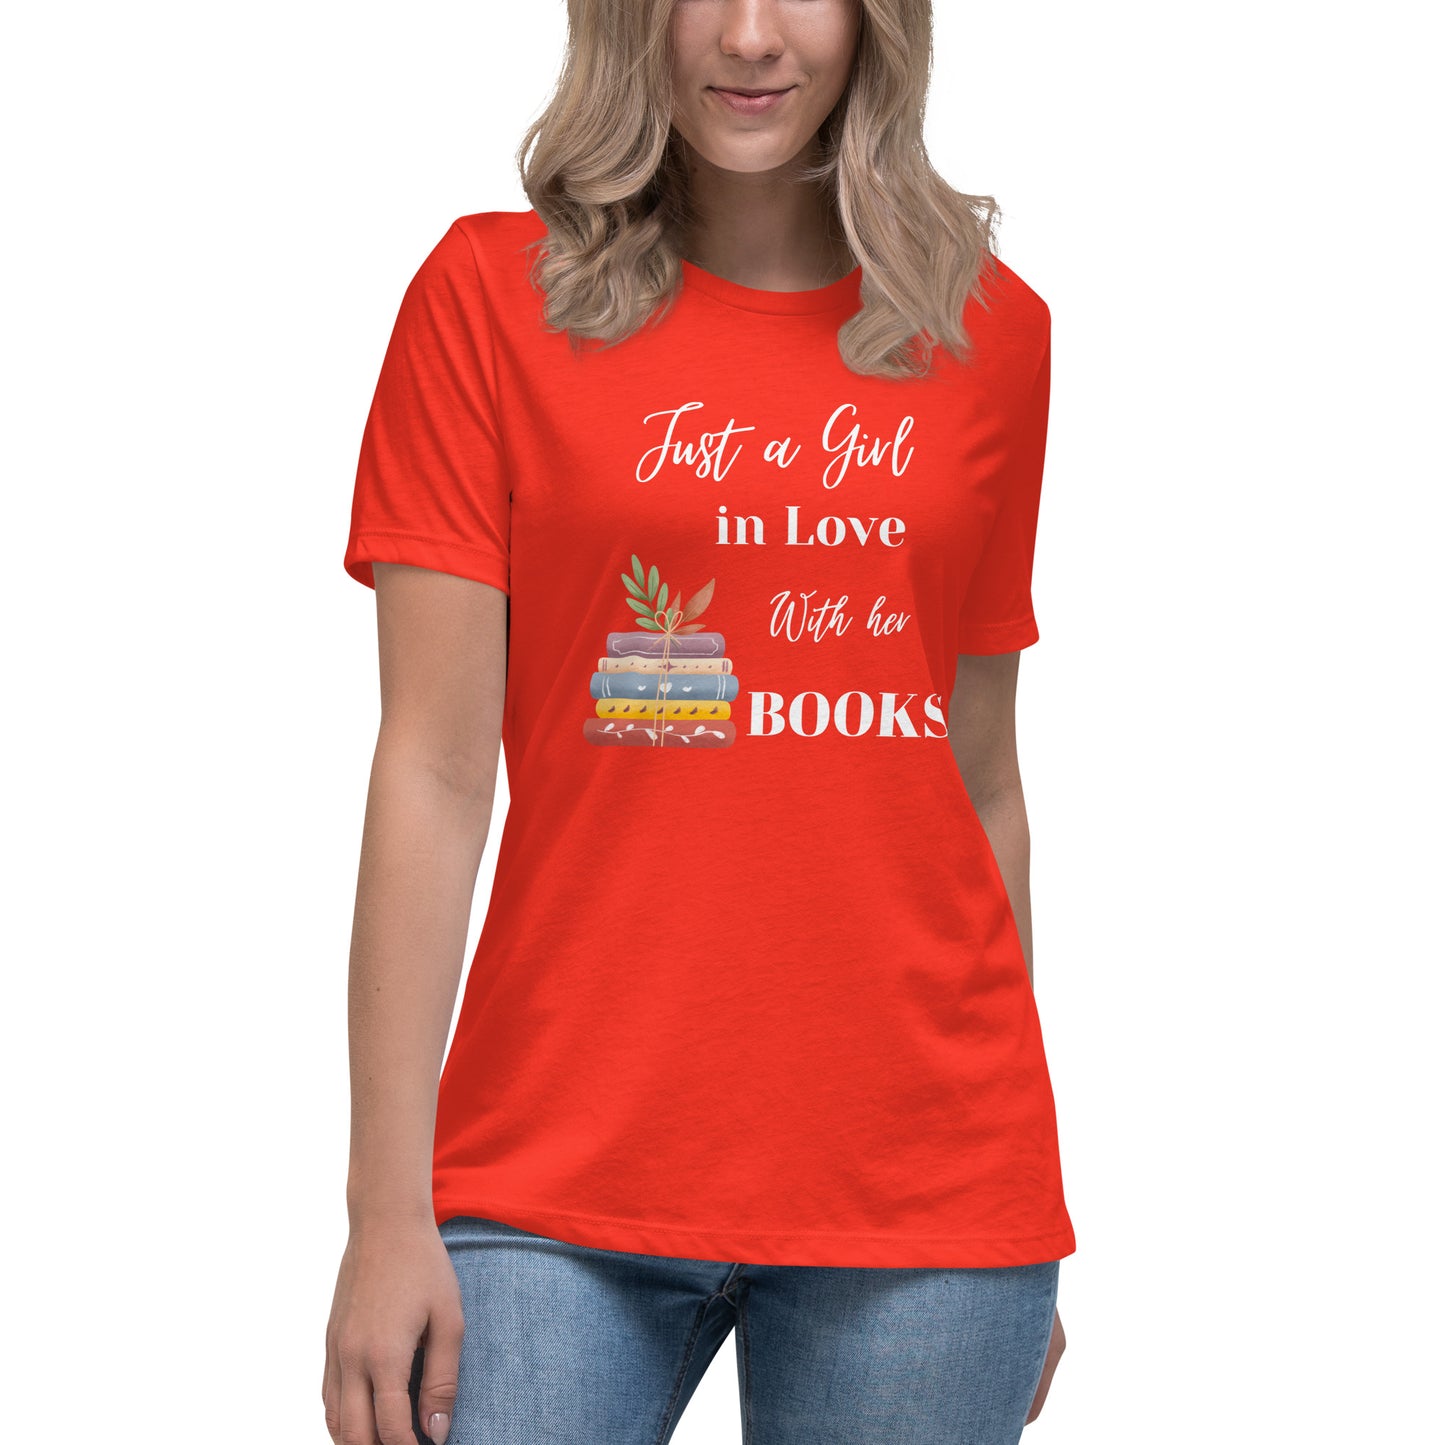 Women's Relaxed T-Shirt, Just a girl in love with her books